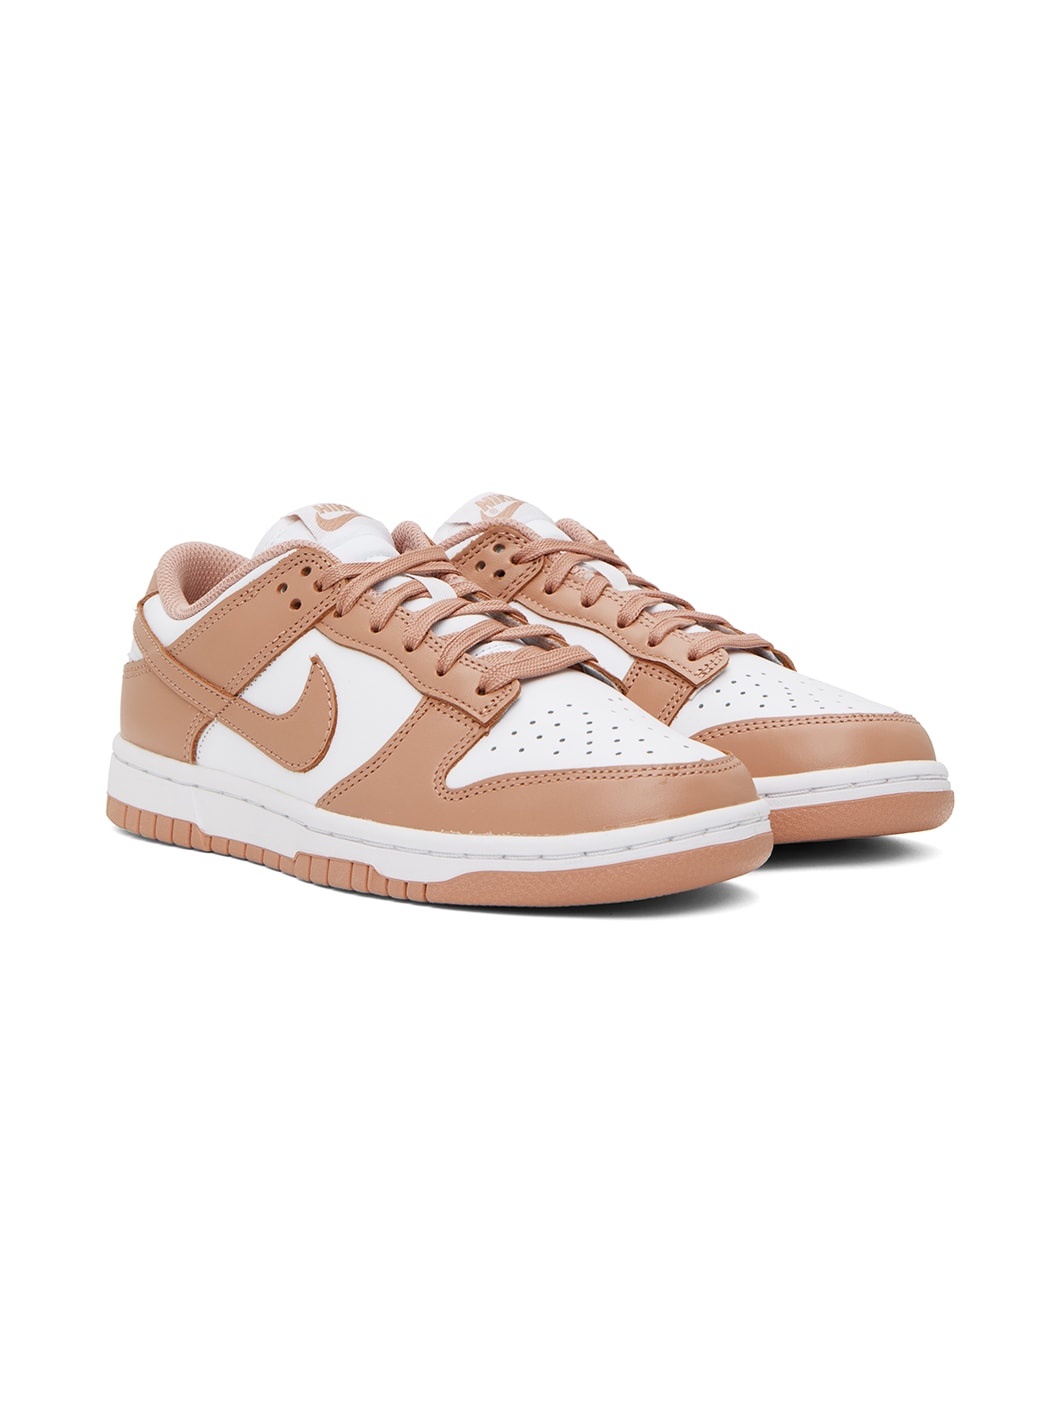 White & Beige Dunk Low By You Sneakers - 4